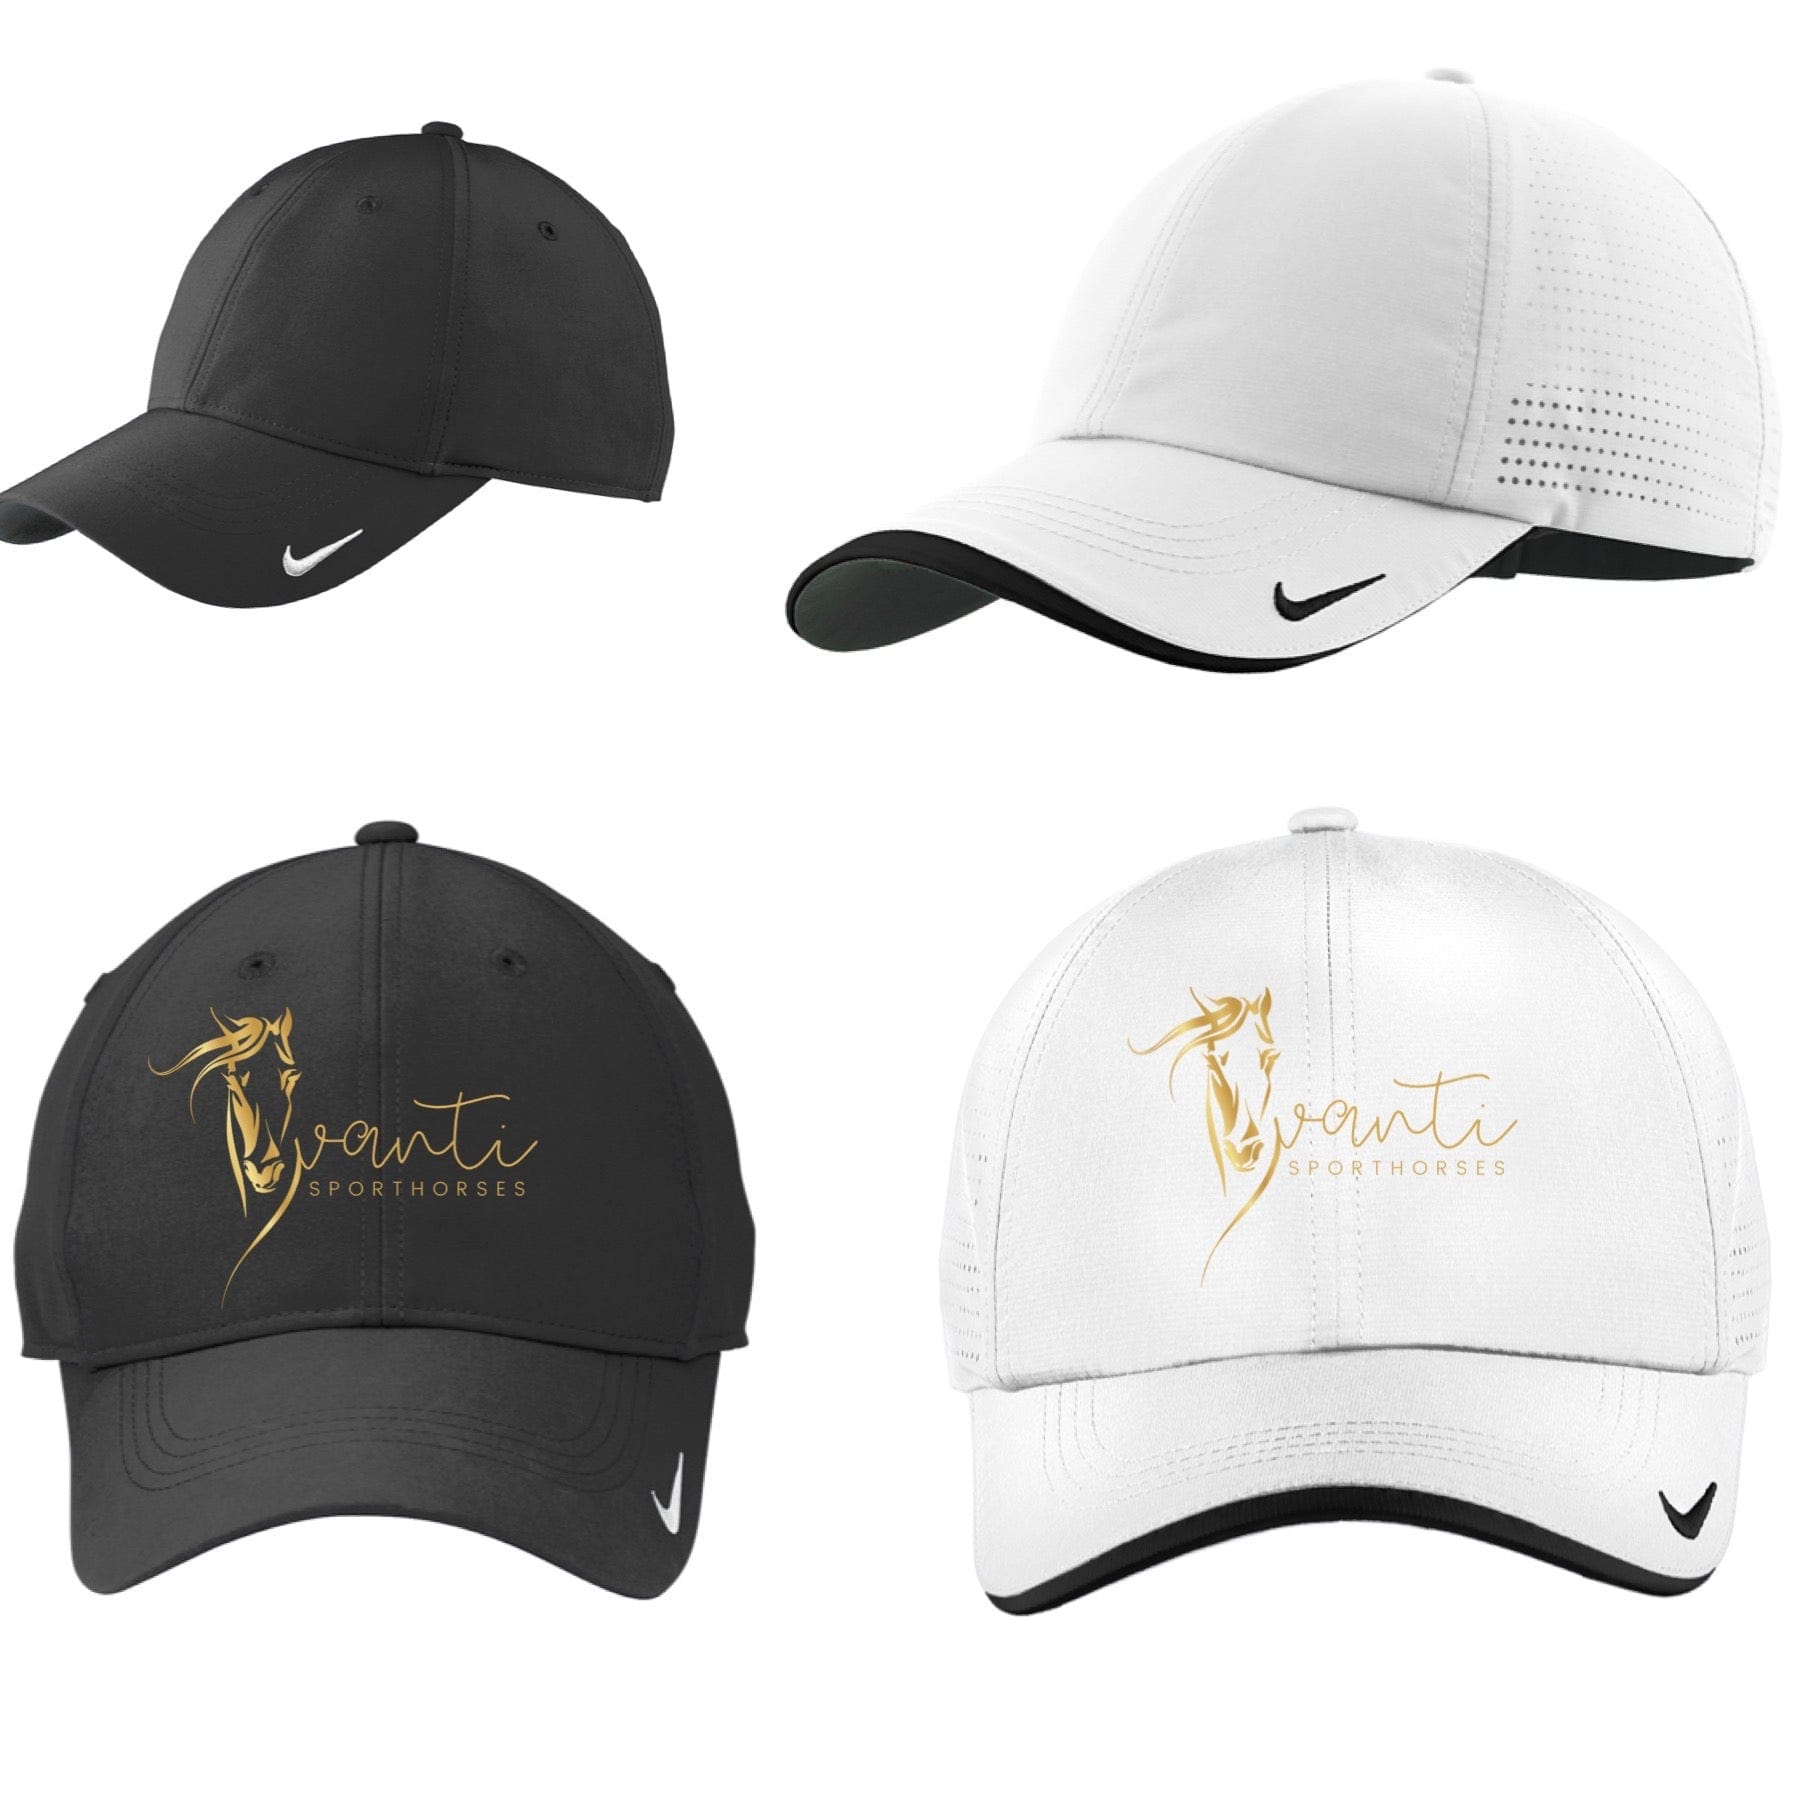 Equestrian Team Apparel Avanti Sport Horses Baseball Cap equestrian team apparel online tack store mobile tack store custom farm apparel custom show stable clothing equestrian lifestyle horse show clothing riding clothes horses equestrian tack store